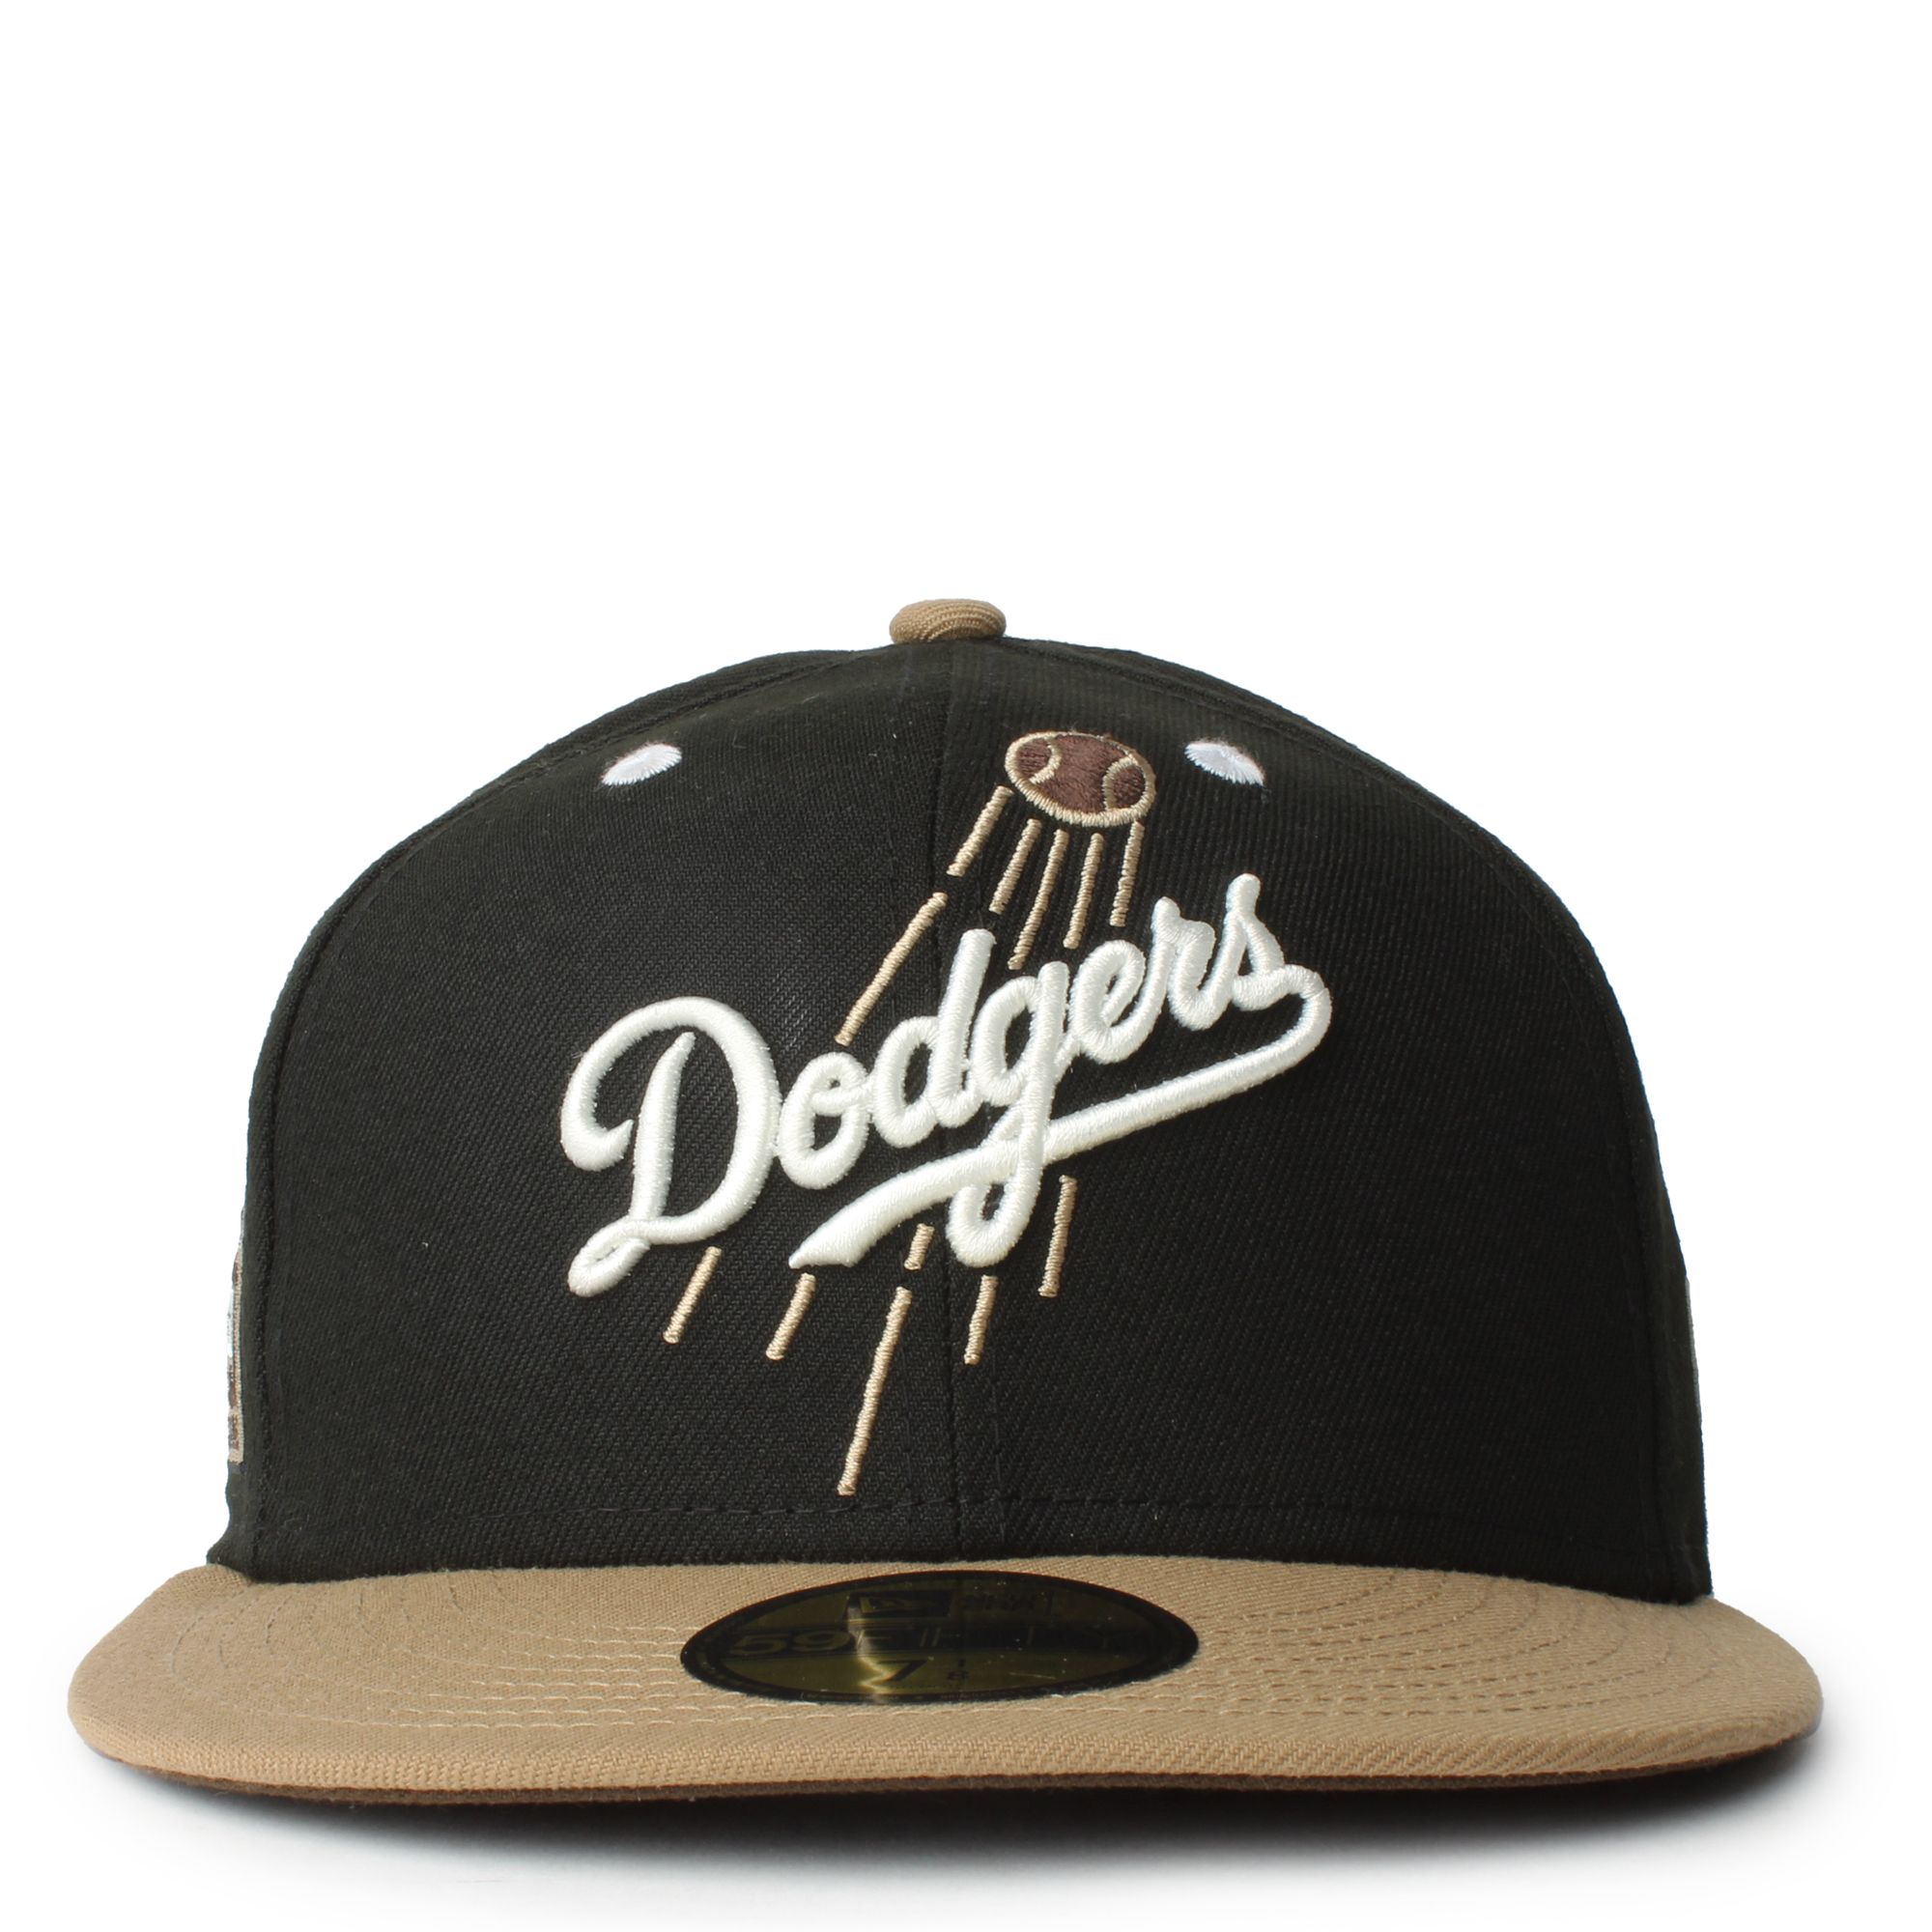 NEW ERA CAPS Los Angeles Dodgers Khaki 59Fifty Fitted Hat 70782454